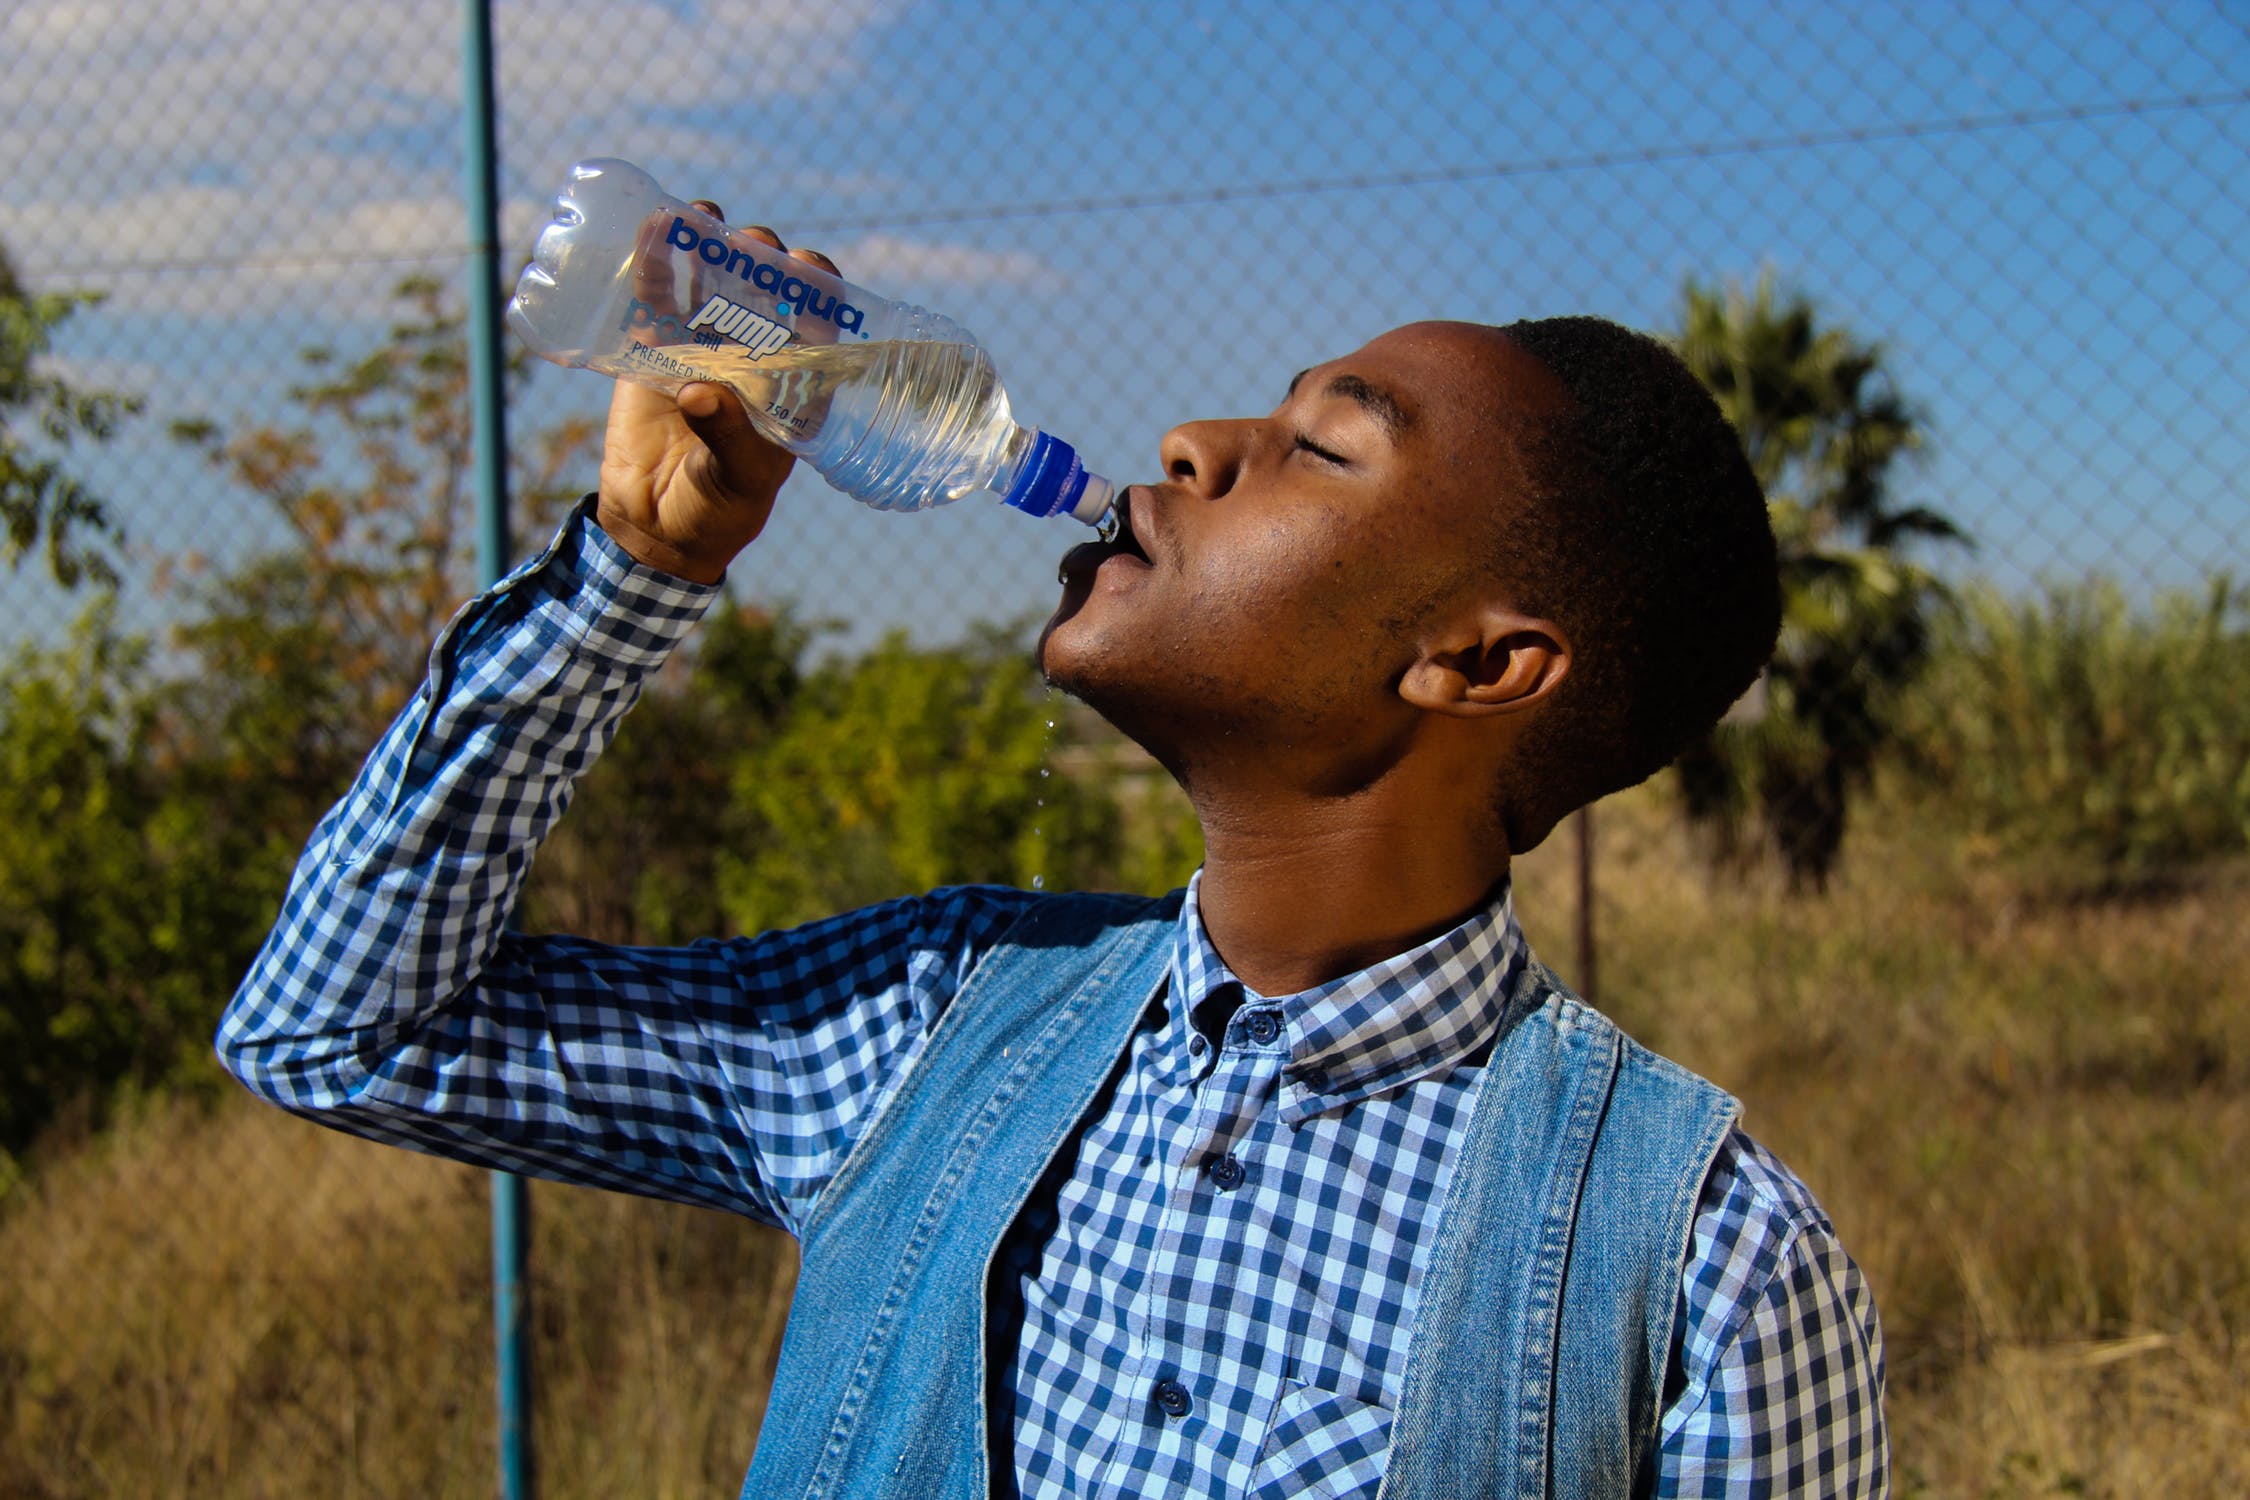 5 Tips to Stay Hydrated This Summer